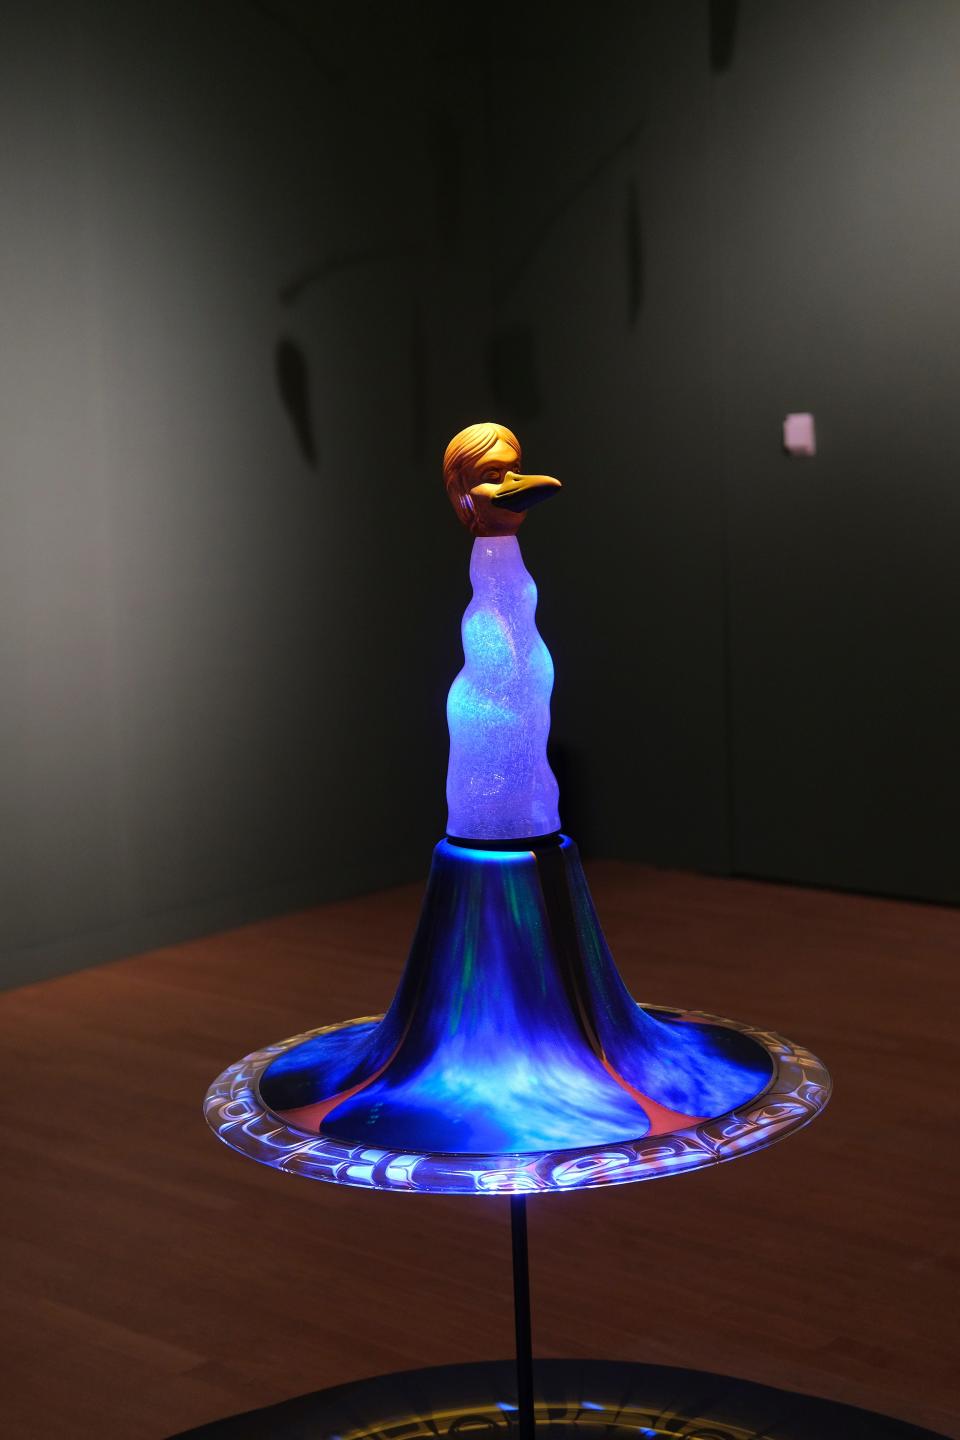 The 2018 piece "Yeil Koowditee (Raven Birth), which combines blown, hot-sculpted and sand-carved glass with video projections, is displayed Thursday, Nov. 9, 2023, in the Oklahoma City Museum of Art exhibit "Preston Singletary: Raven and the Box of Daylight." The multi-sensory experience combines glass, video, and audio to tell the story of Raven, a creator figure in Tlingit culture.